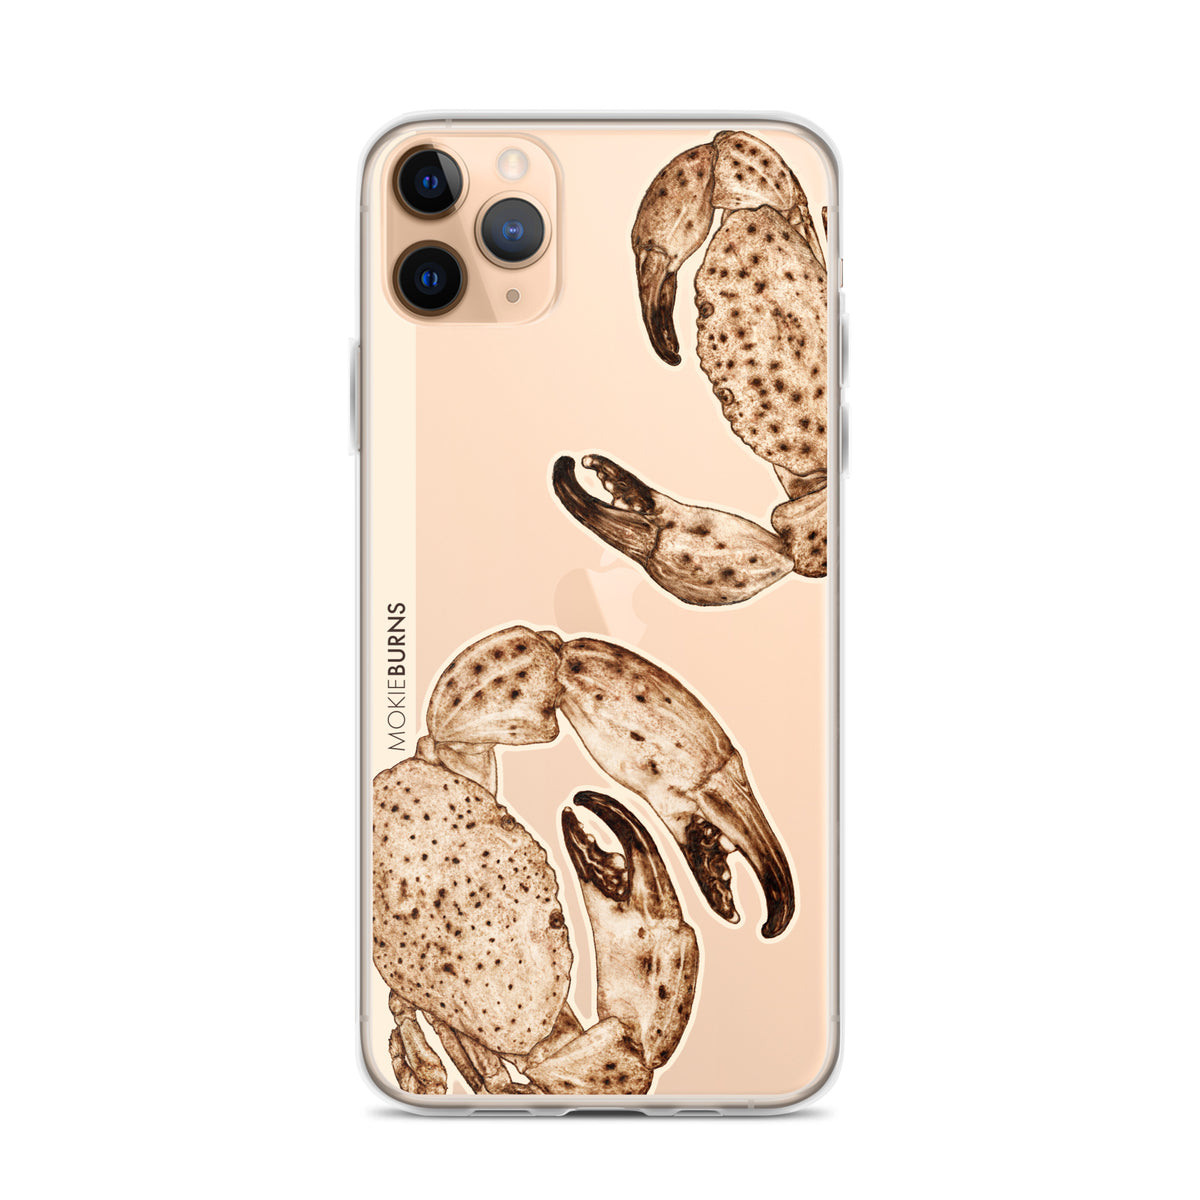 Florida Stone Crabs - Clear iPhone Case [all sizes] - FREE SHIPPING